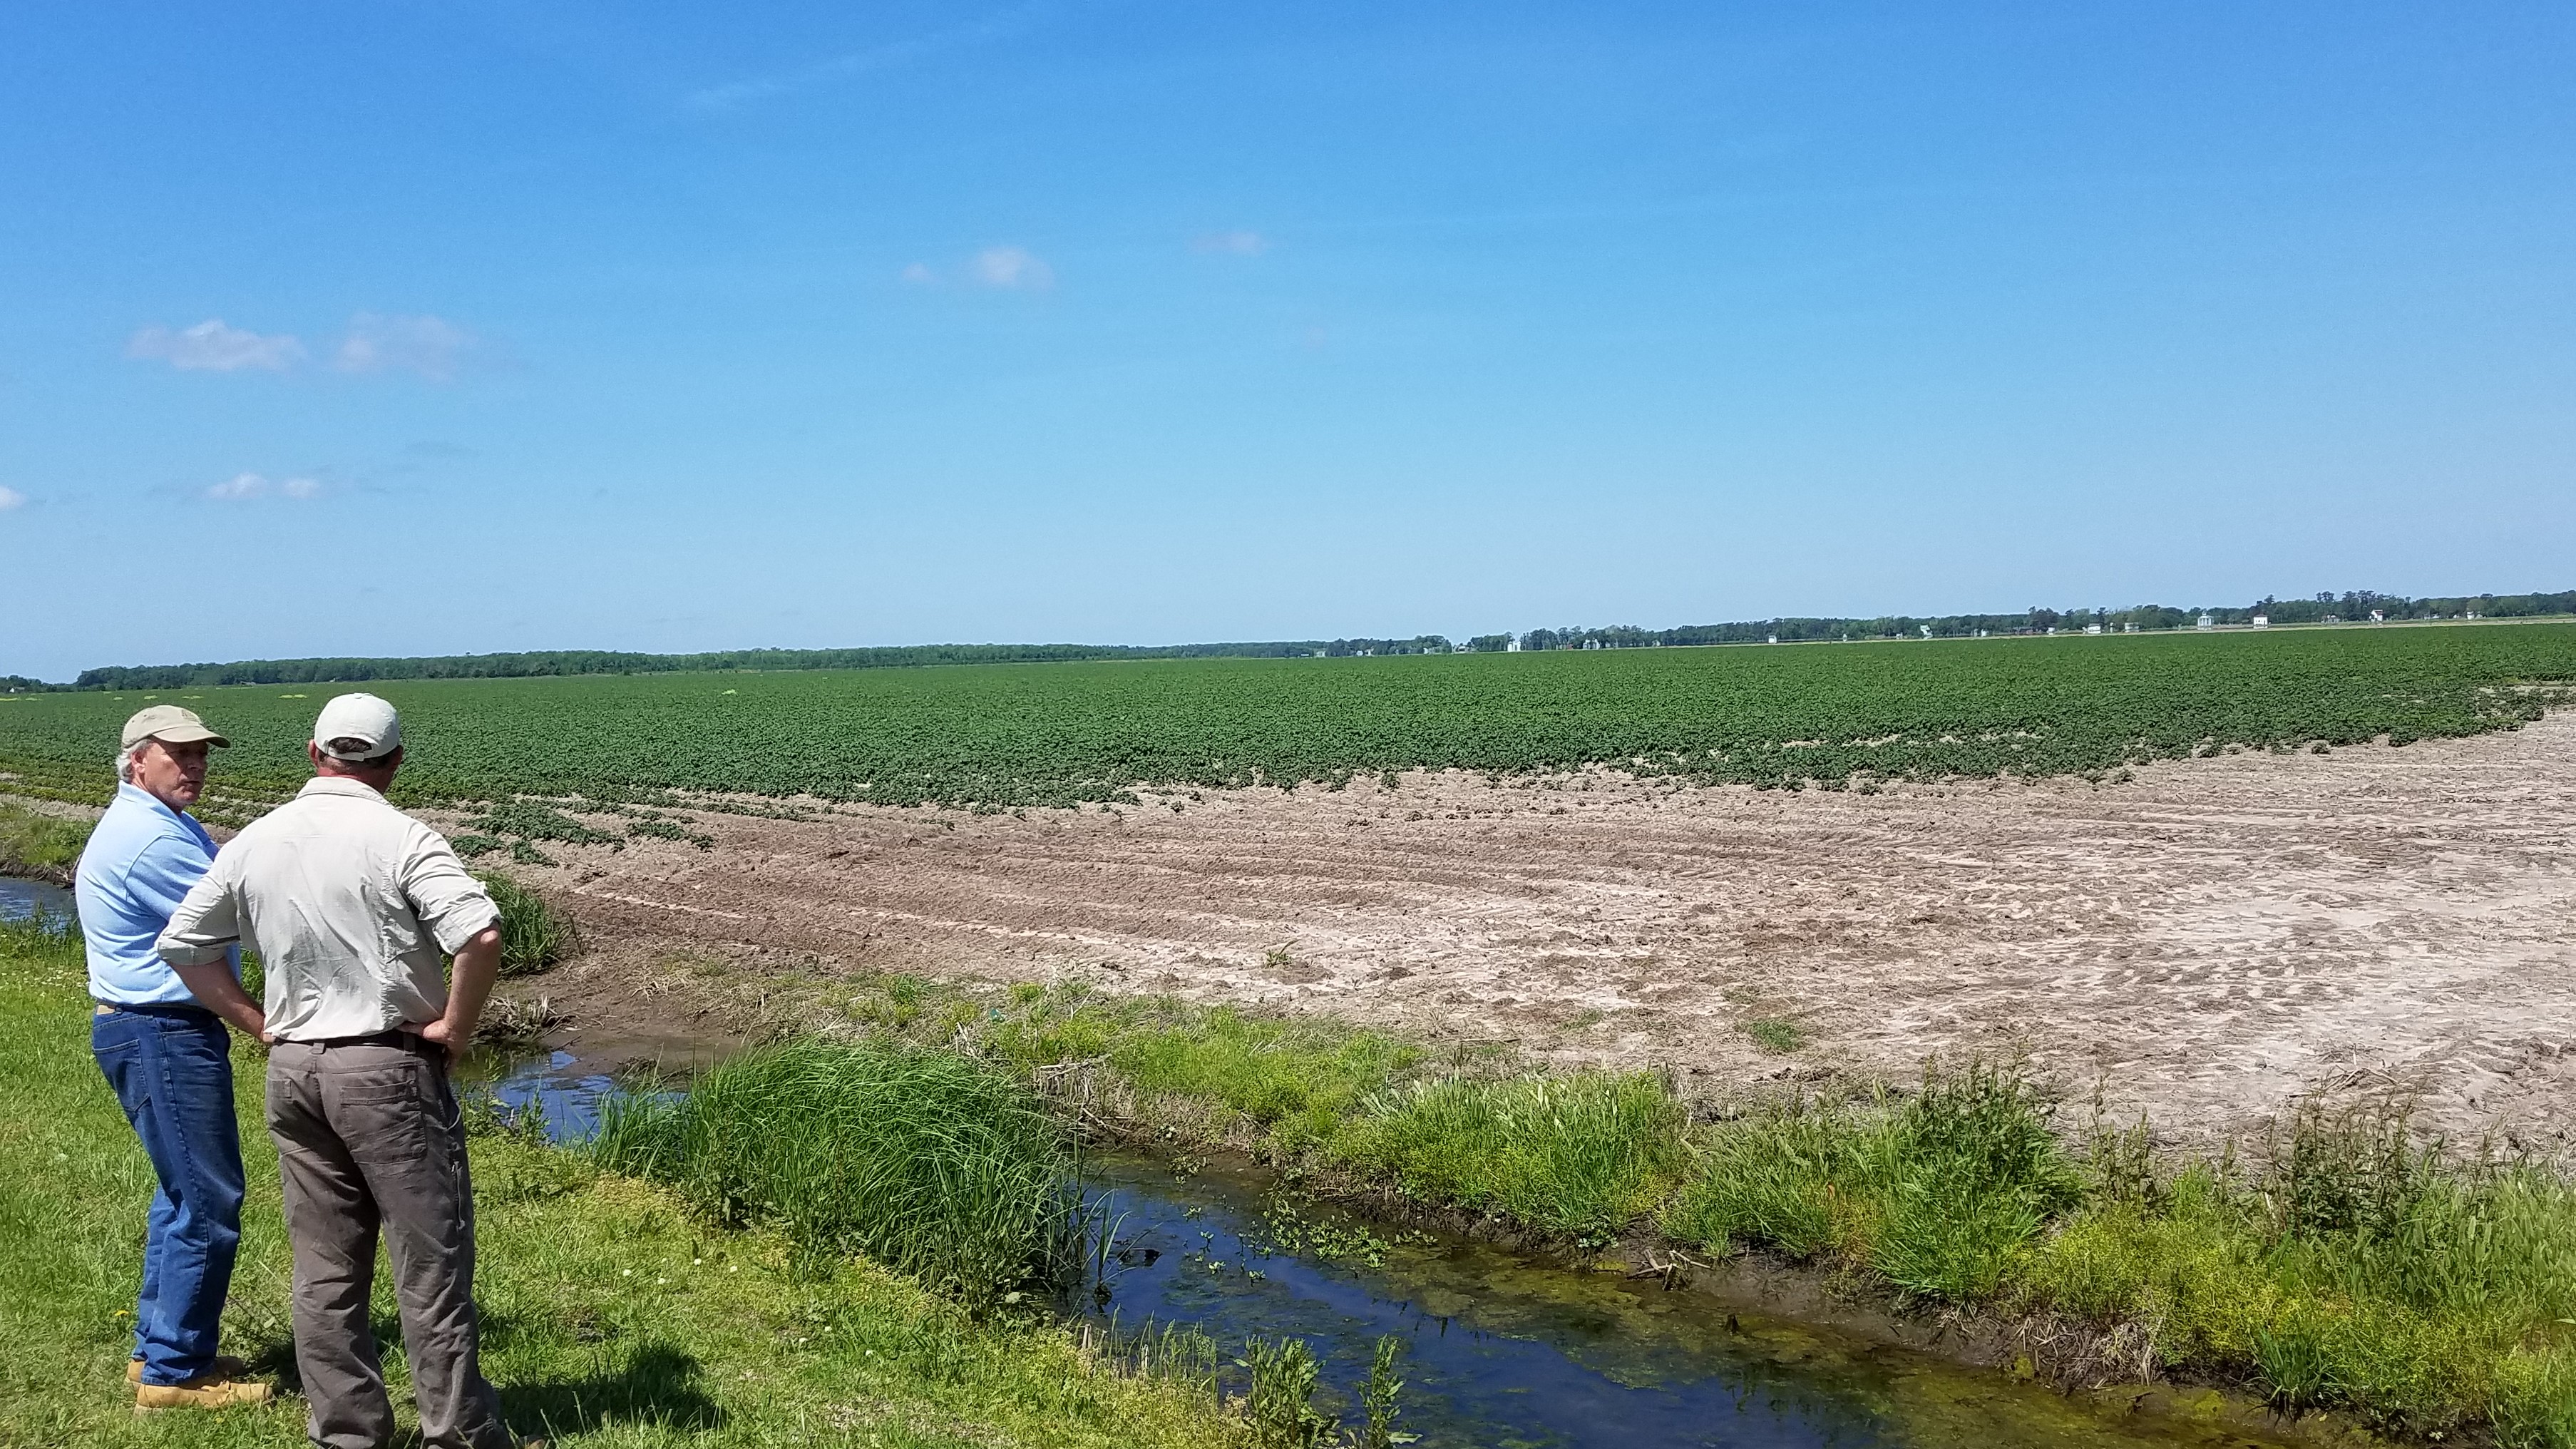 Chris Miller (left) NRCS Project Liaison to the NE & SE Hubs, and Steve McNulty (right), SE Hub Director, survey farmland in eastern North Carolina that is suspected to have lost productivity due to saltwater intrusion. Photo by Michael Gavazzi, USDA